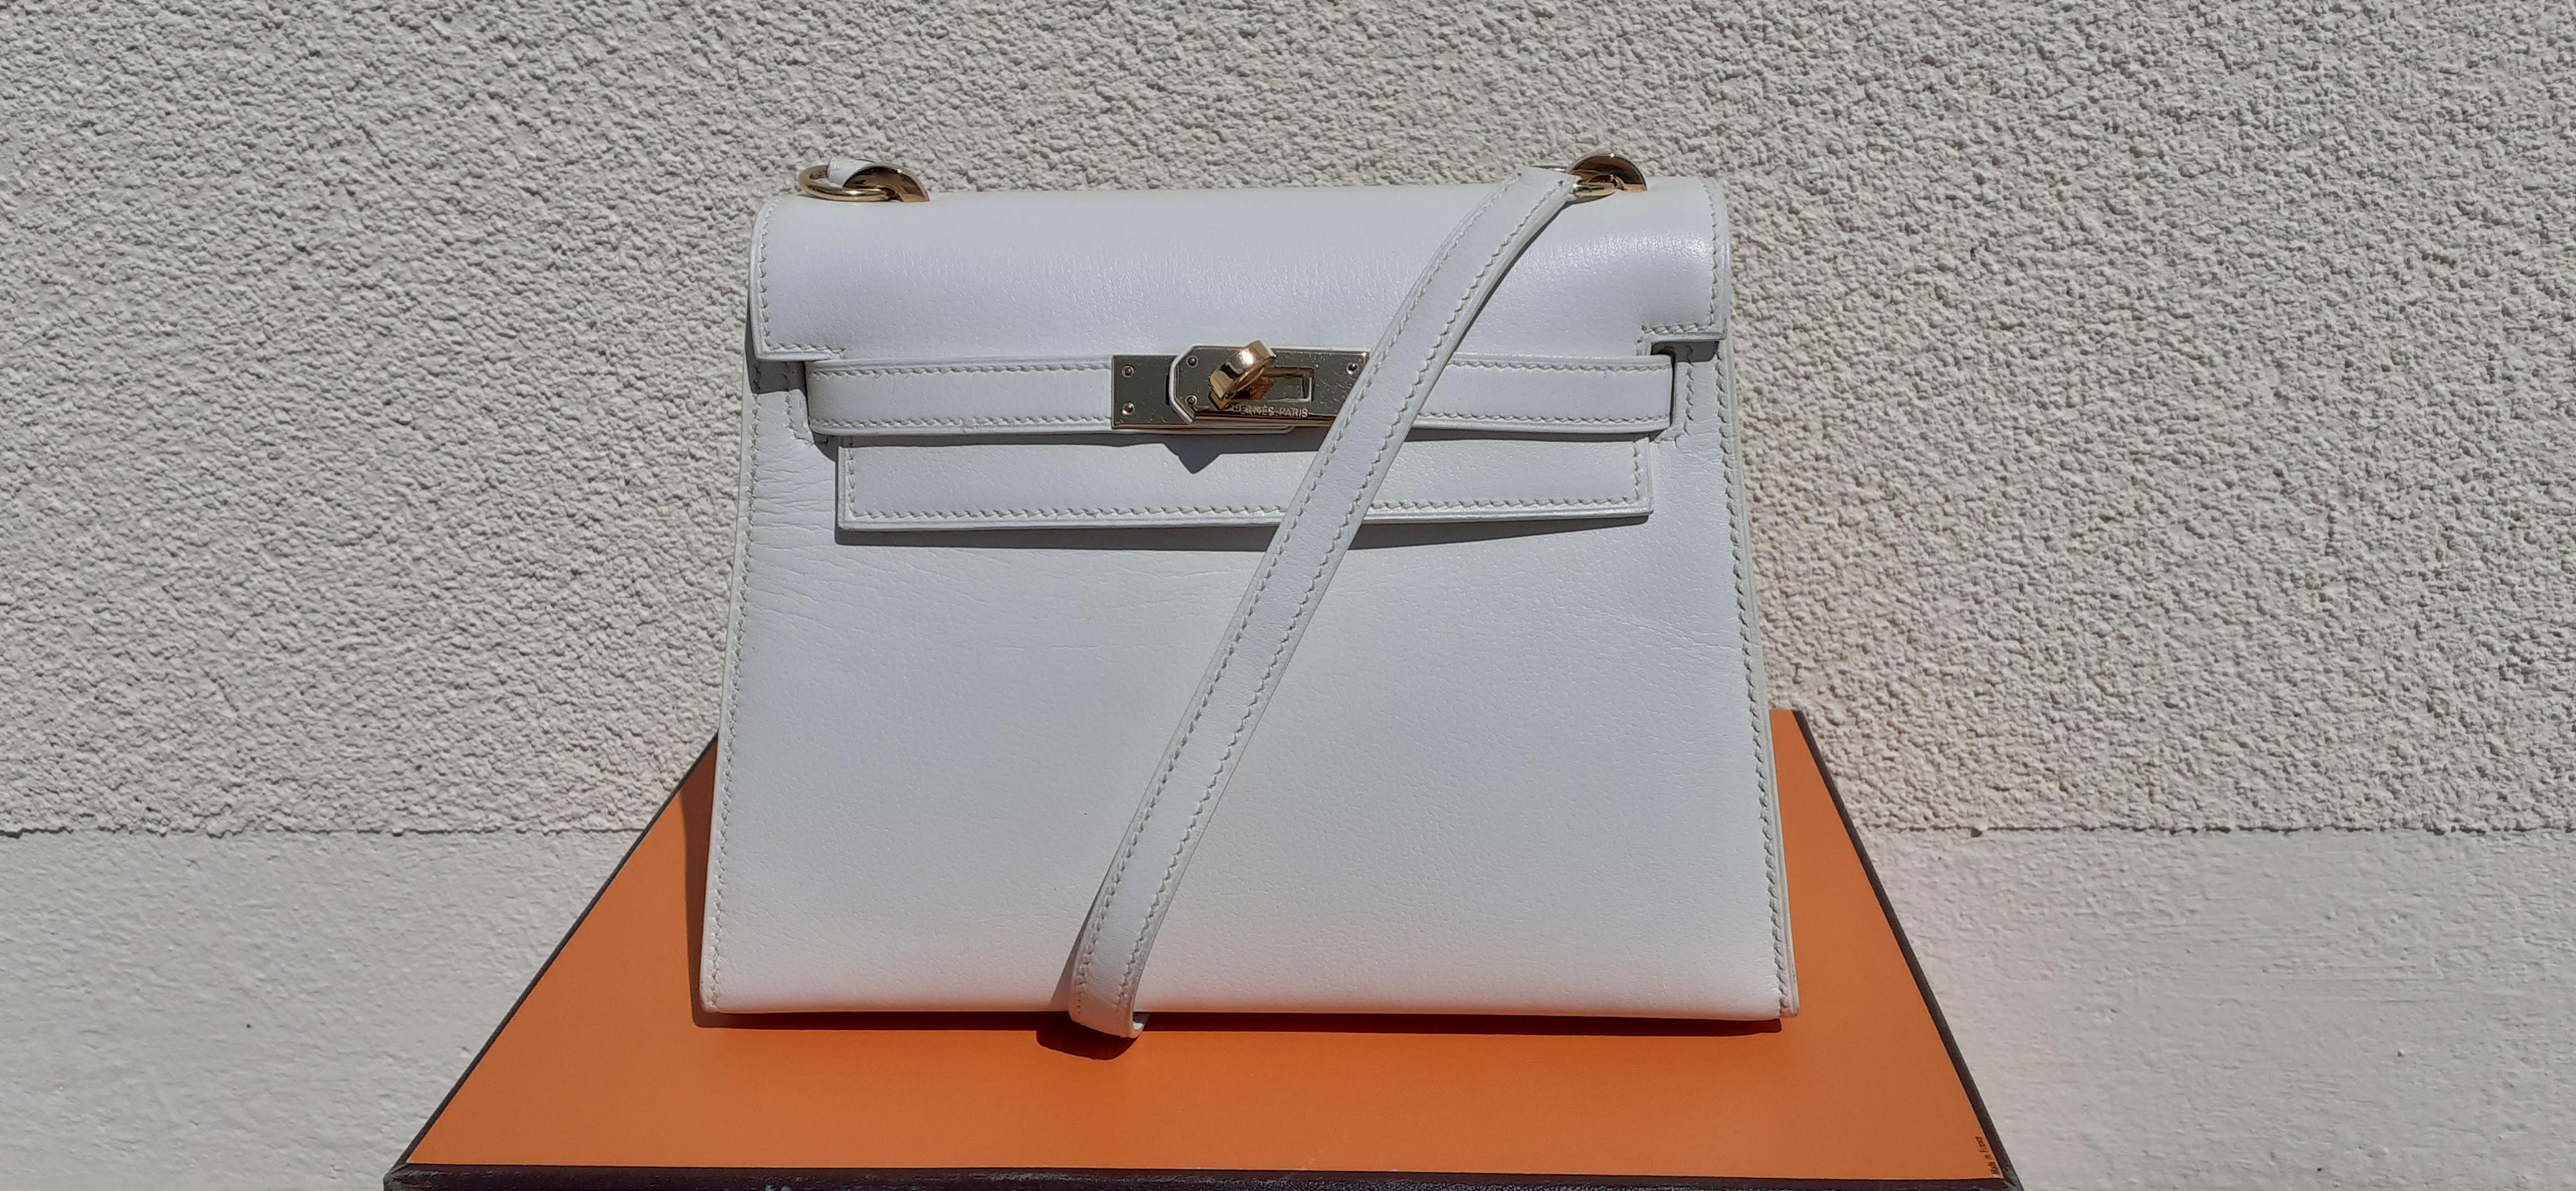 Super Cute Authentic Hermès Mini Kelly Bag

In sellier Version, more chic !

Made in France

Stamp 0 in a circle (1985)

Colorway: White

Outside made of white grained leather and Golden Hardware

Flap lined with grained white leather, Inside lined